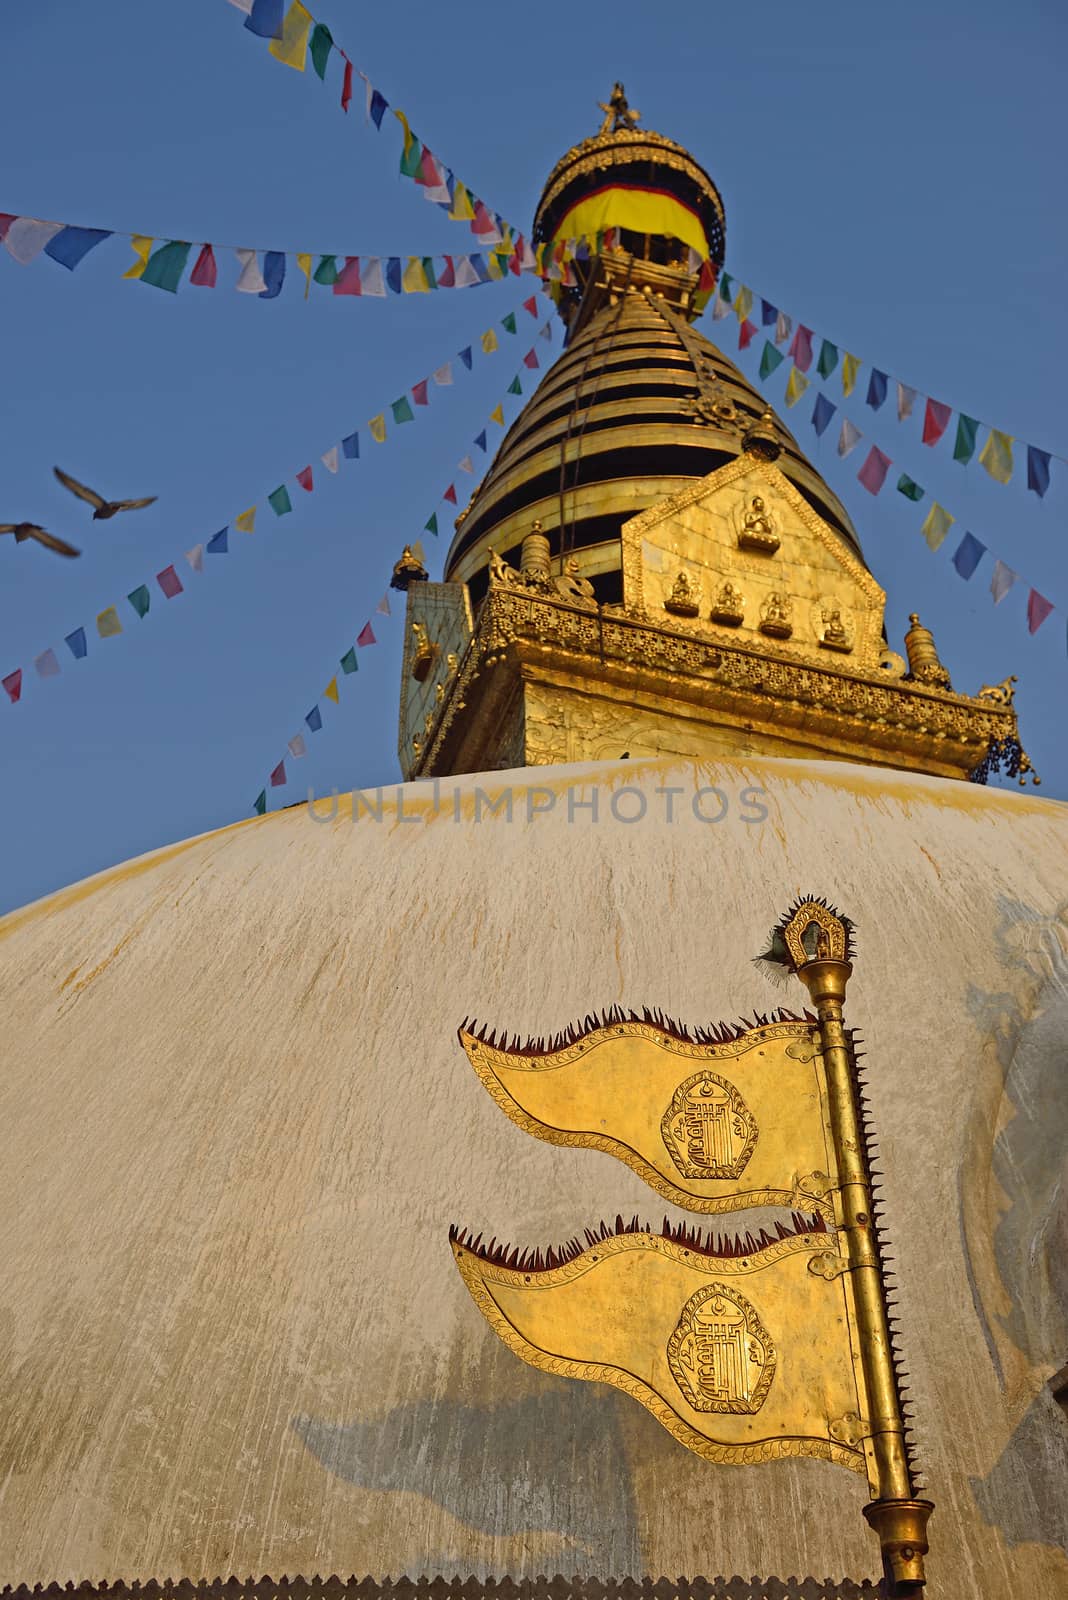 The golden flag is located at the Swayambhunath Temple in Nepal by think4photop